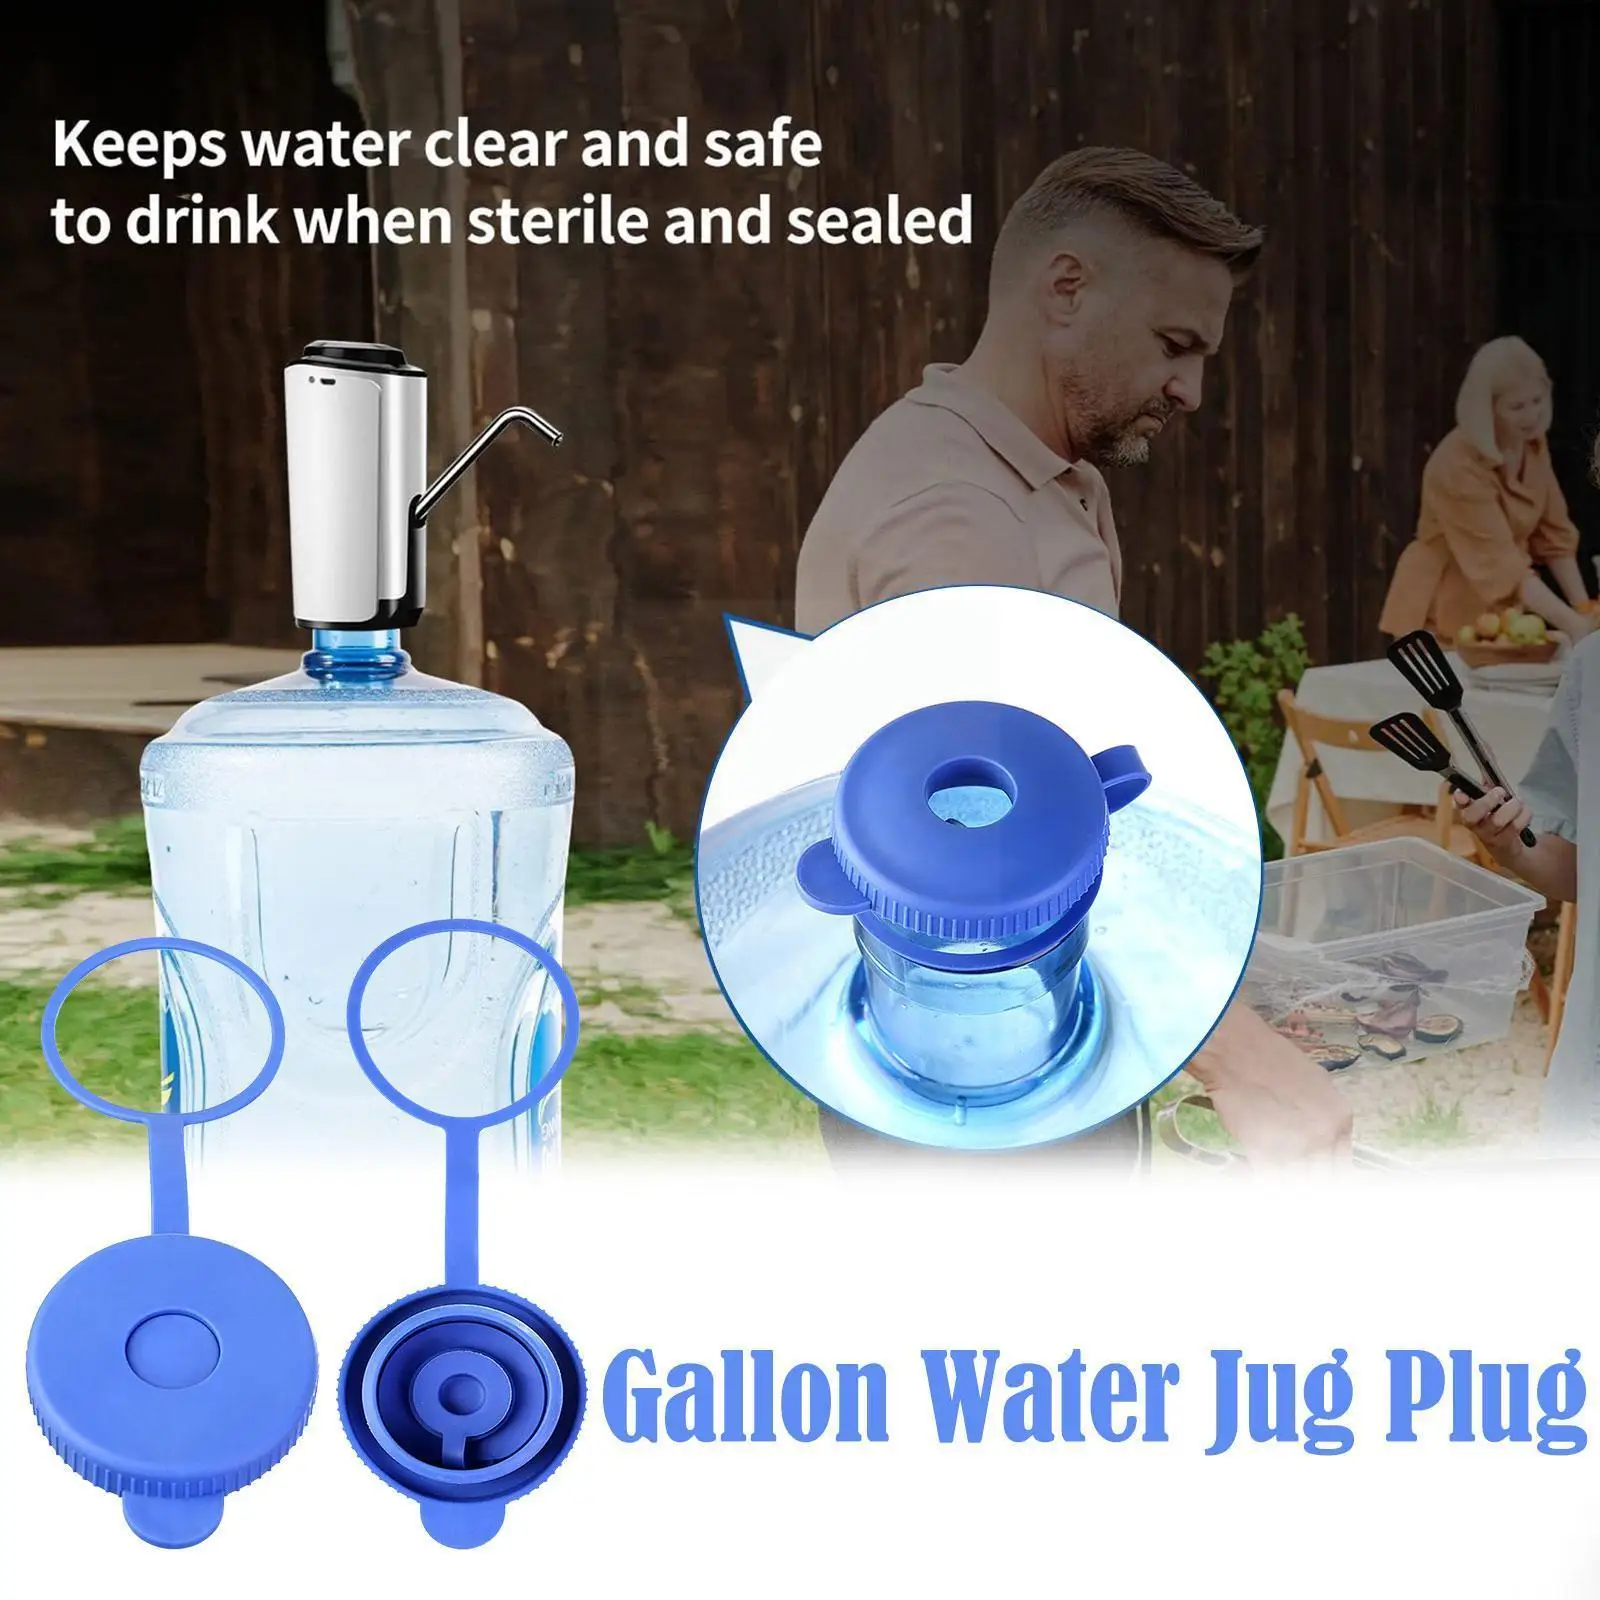 

Reusable Replacement Water Bottle 55mm Gallon Drinking Plug Splash Jug Non-spill Anti S5c7 Caps Jugs Y9o8